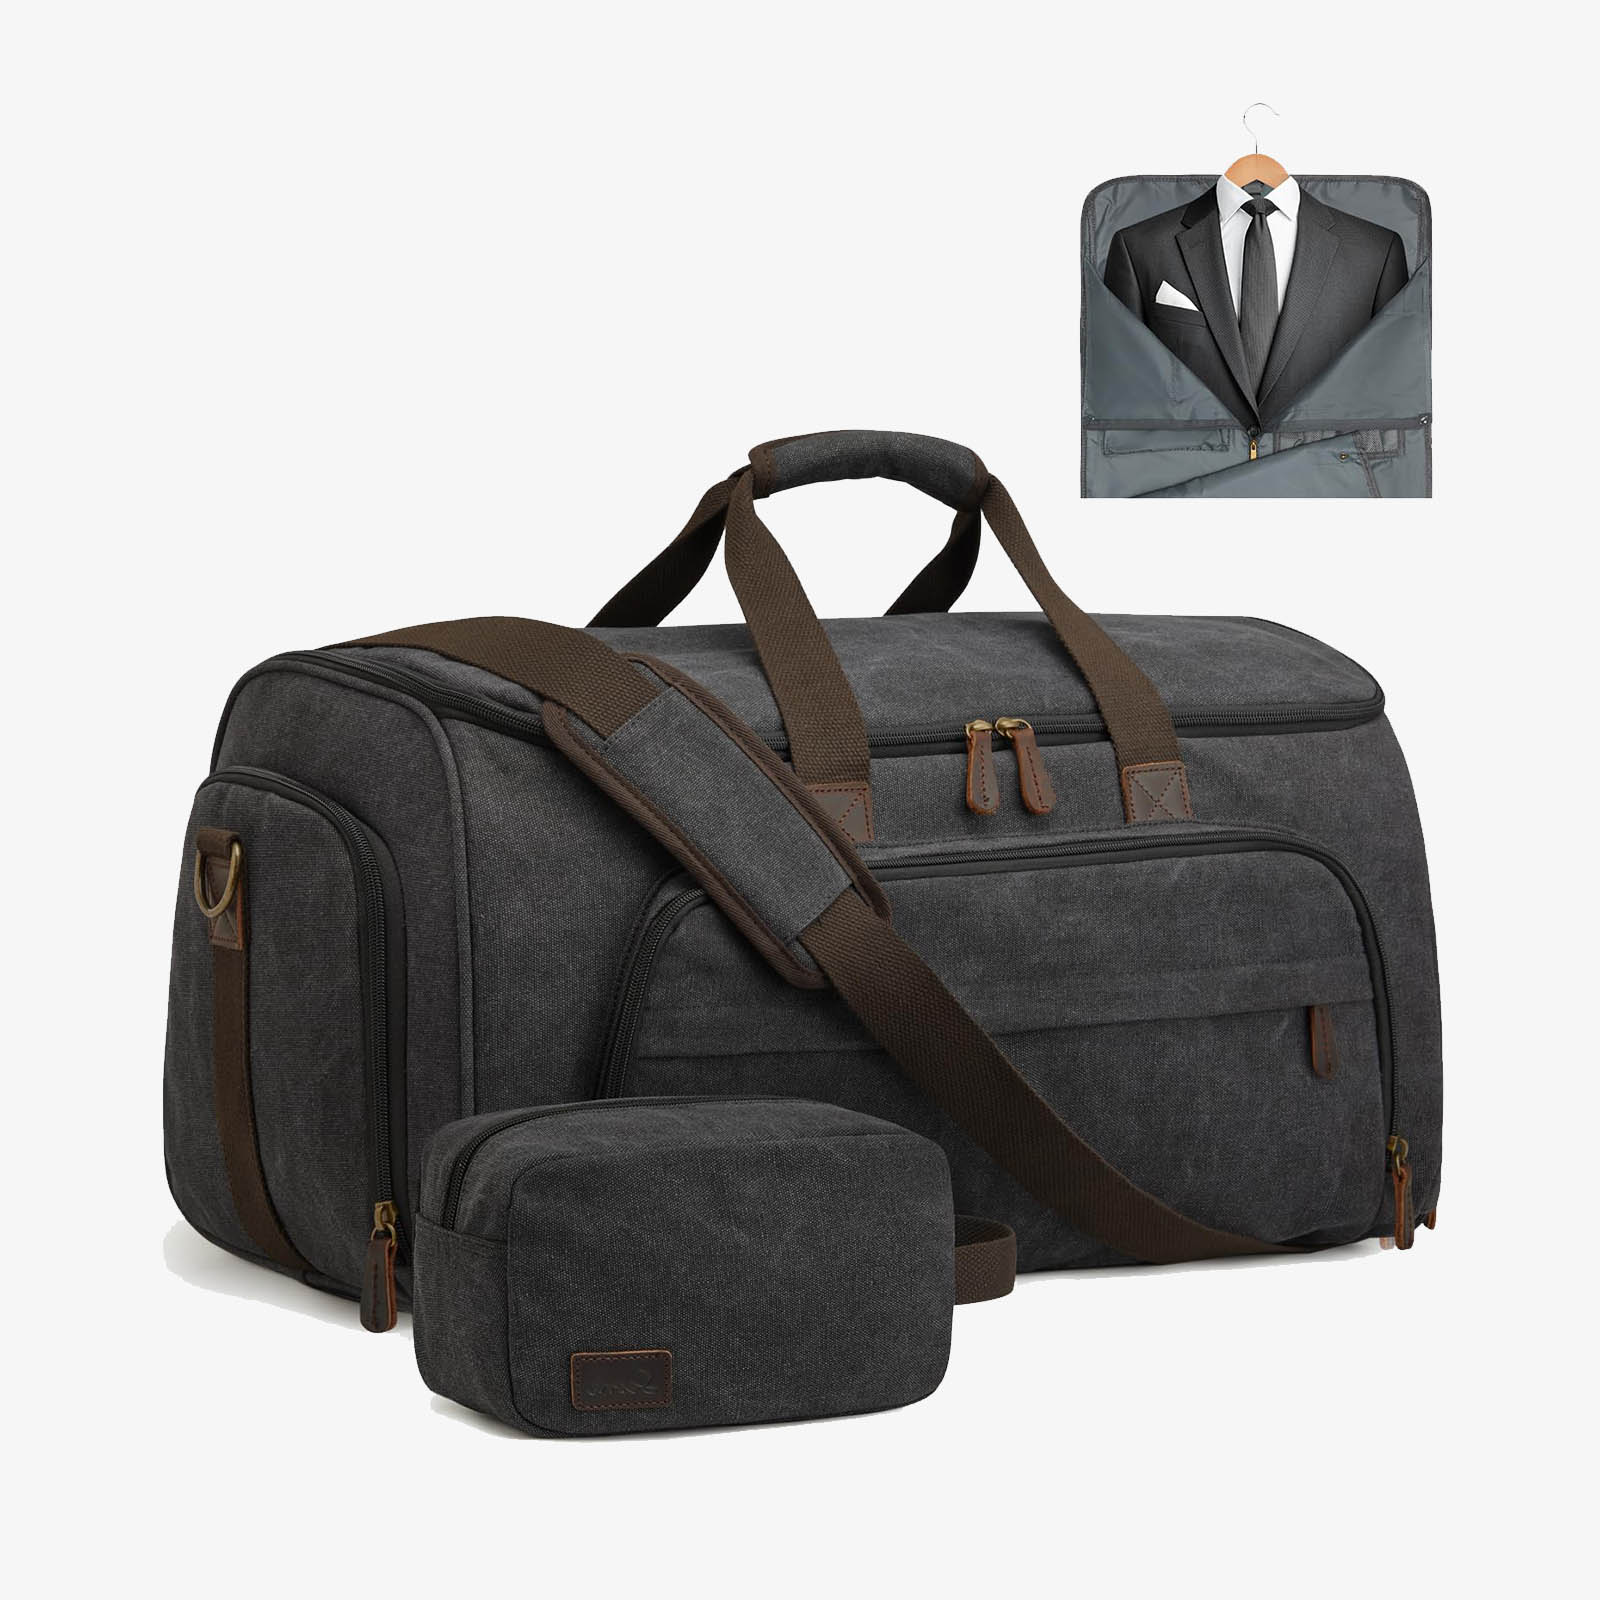 50L All-In-One Garment Travel Bag